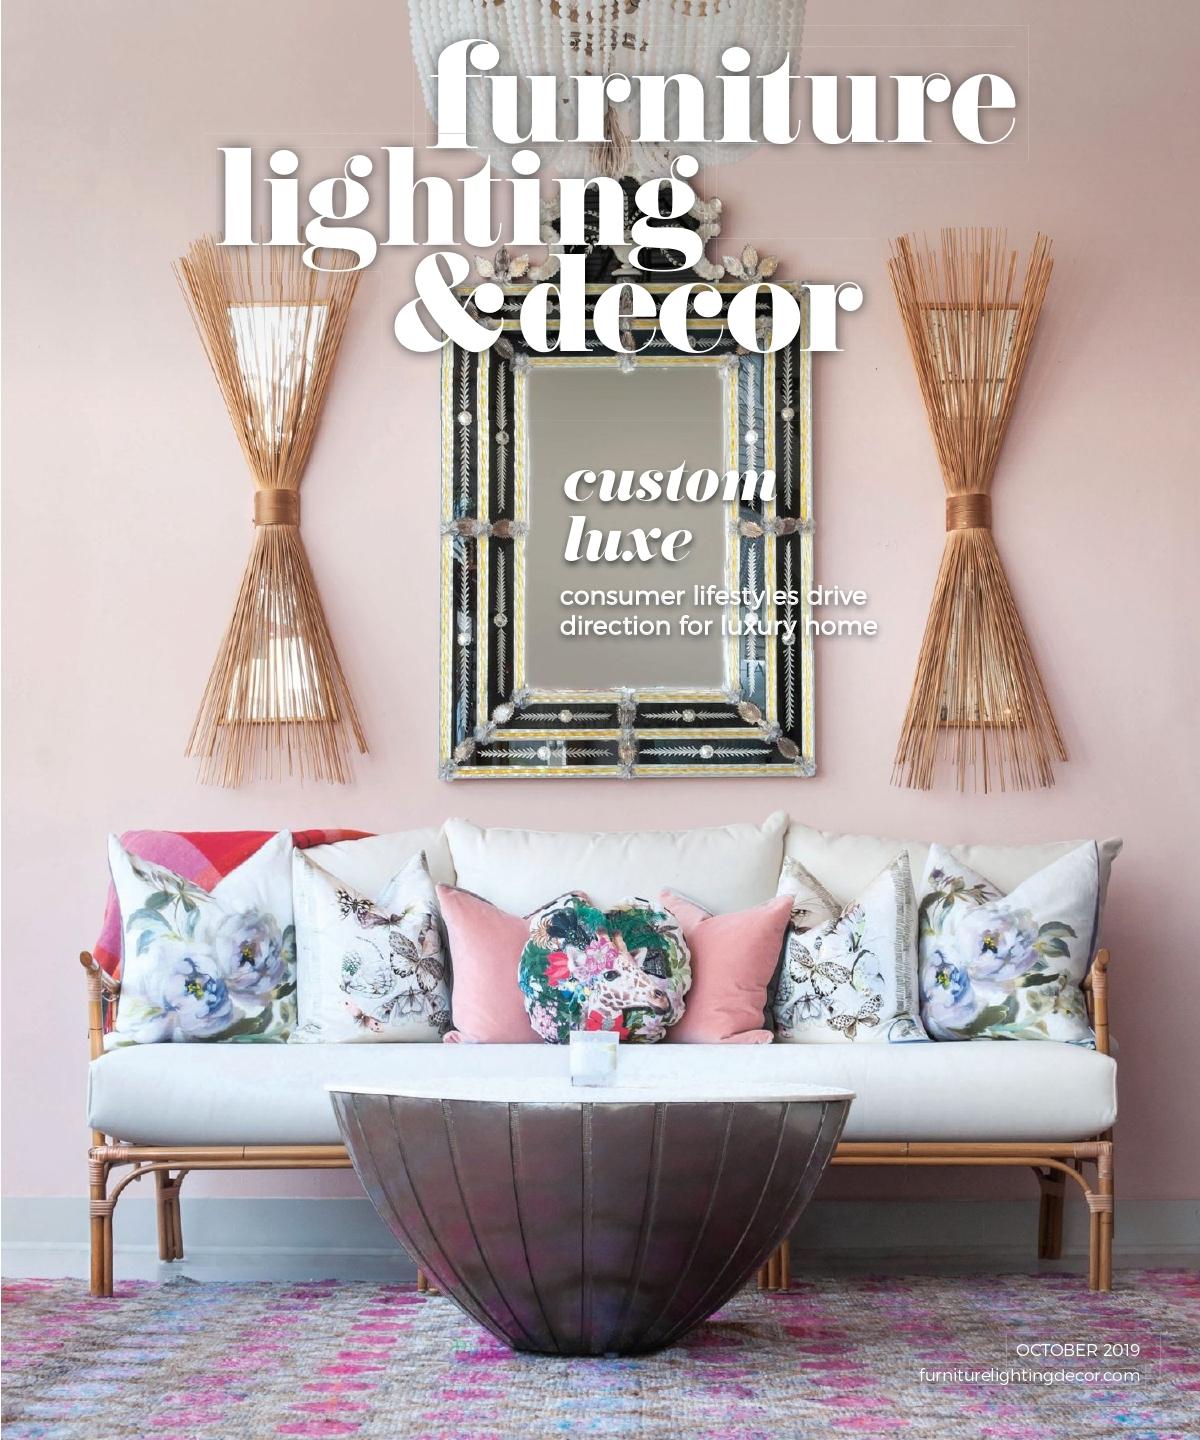 J Banks Design Group featured in Furniture Lighting and Decor magazine